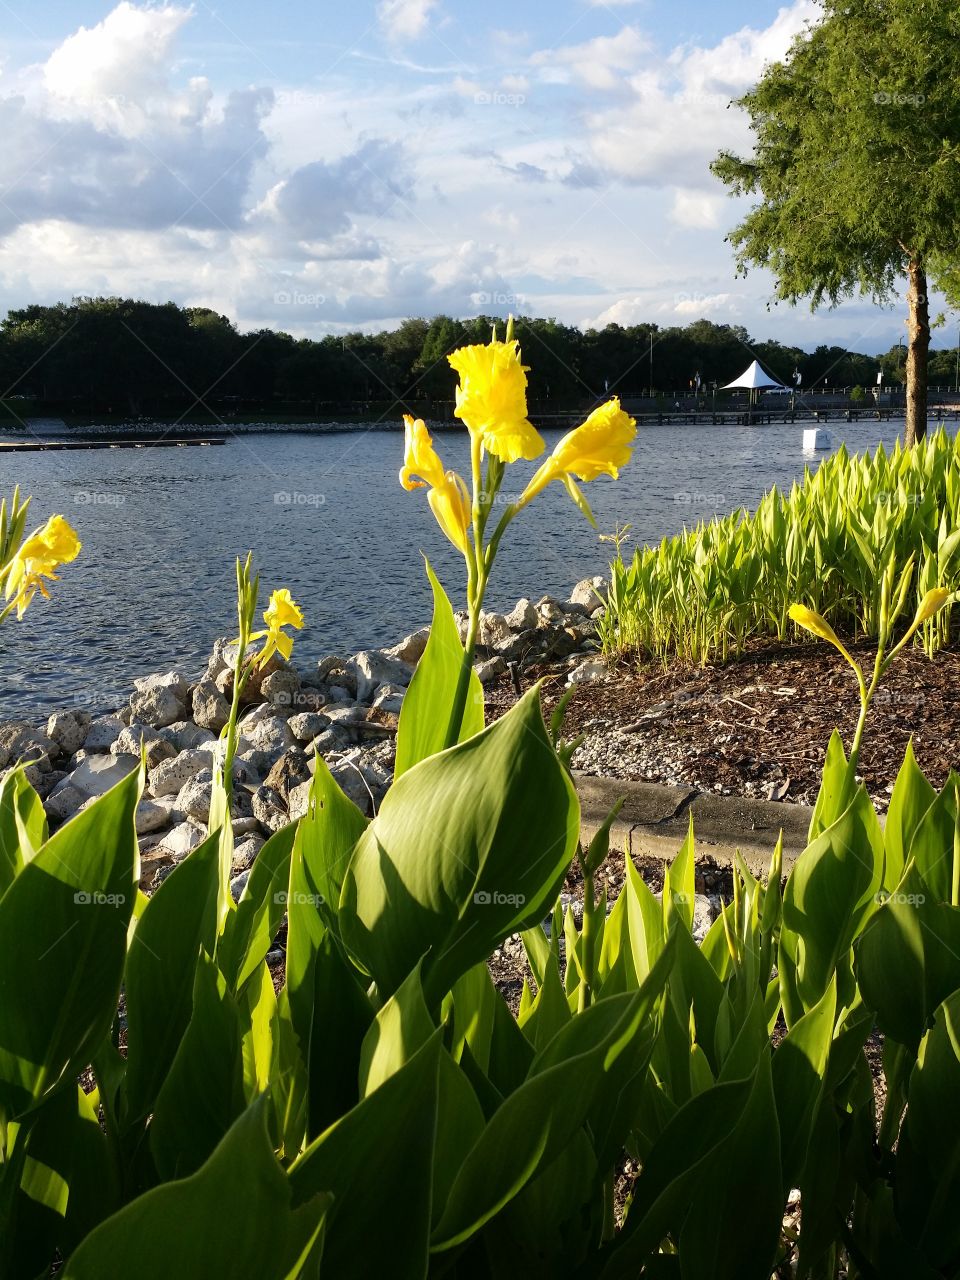 Yellow Flowers In the Park. Took this at Cranes Roost in Altamonte Springs Florida